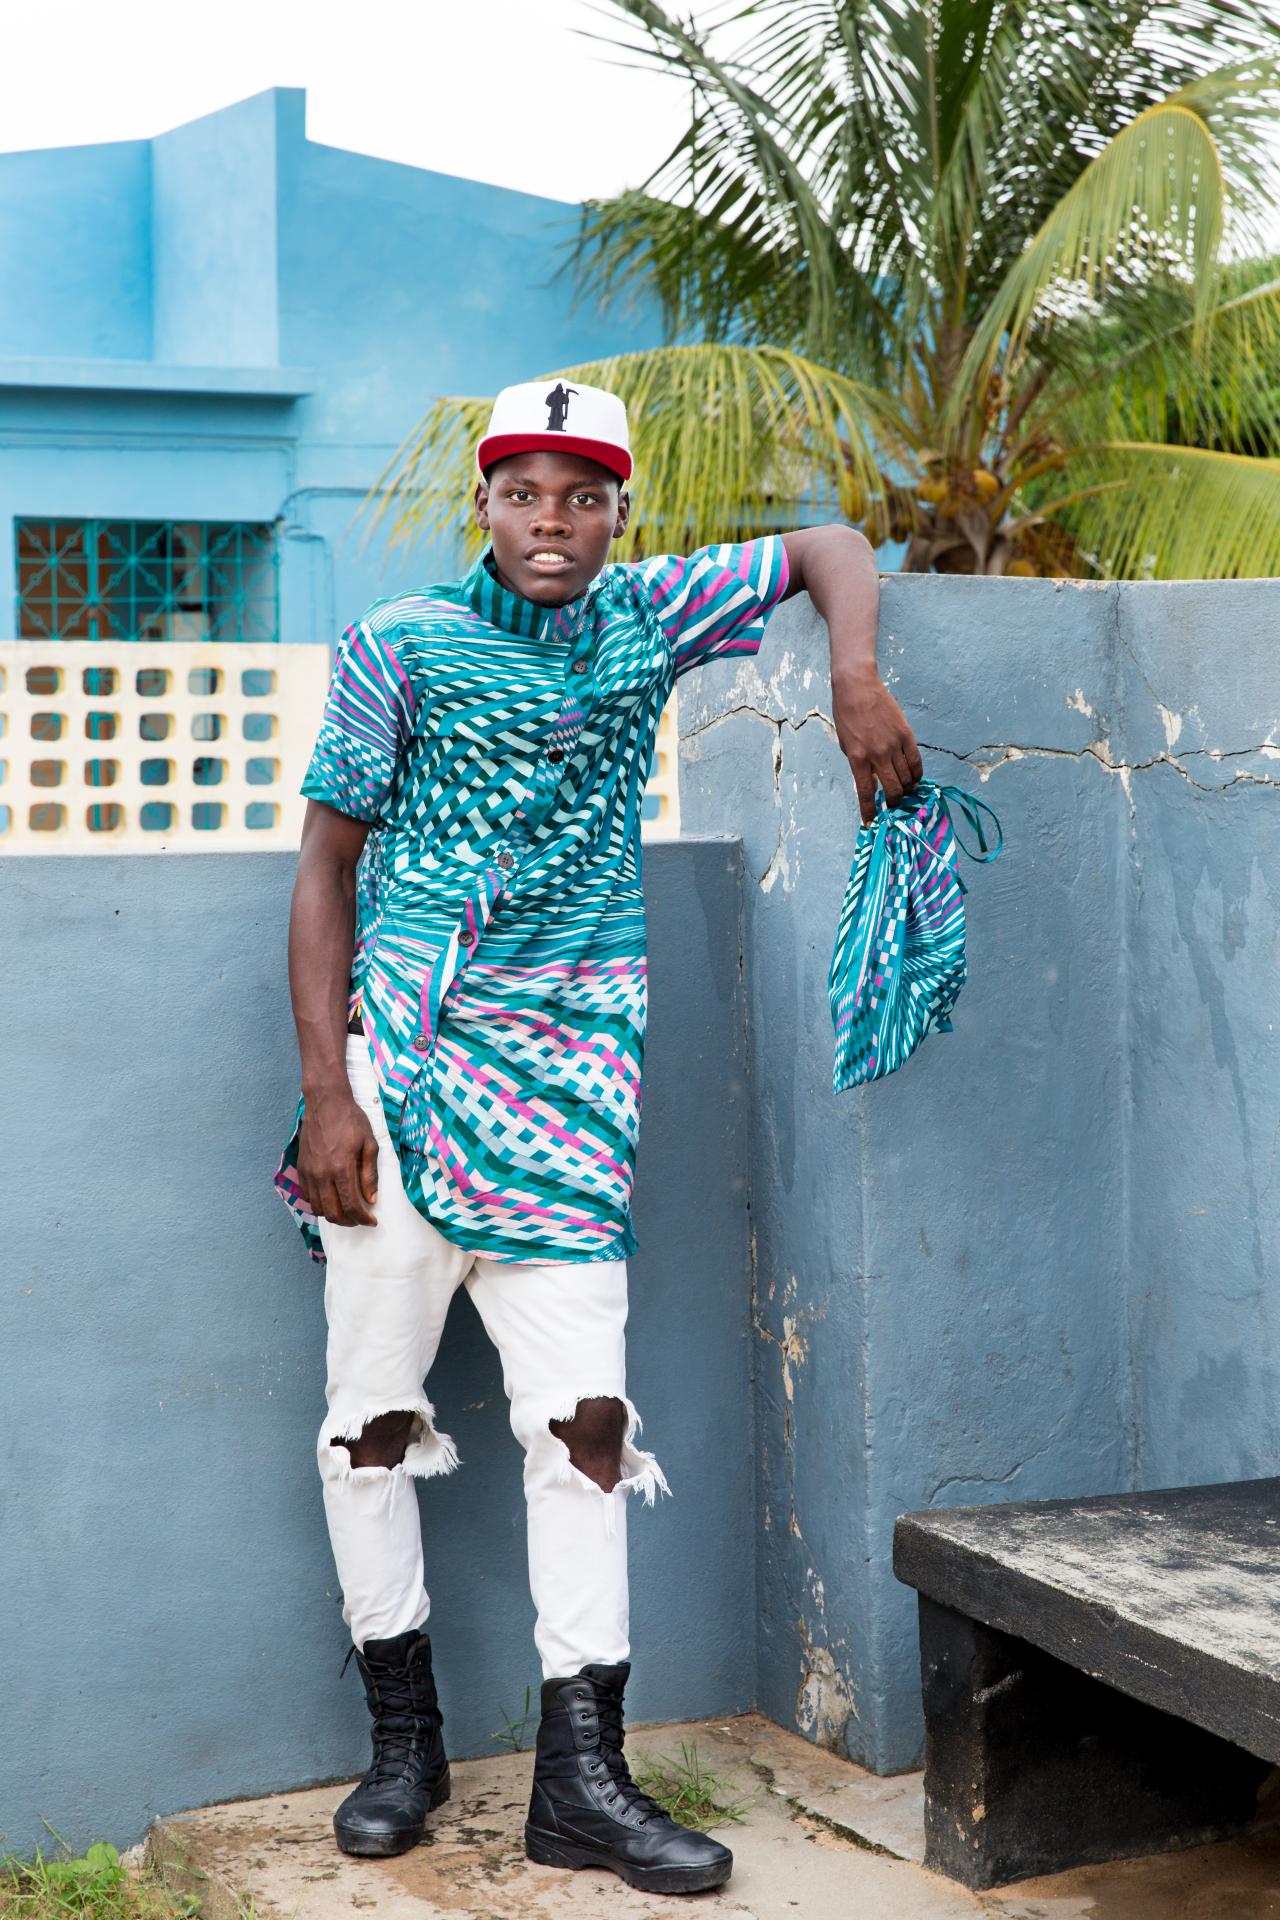 Eduardo, 20 works as a model and an R&B artist. In his music he dresses topics such as love and his country’s history. He’s called Africano by his friends for his love for wax prints.